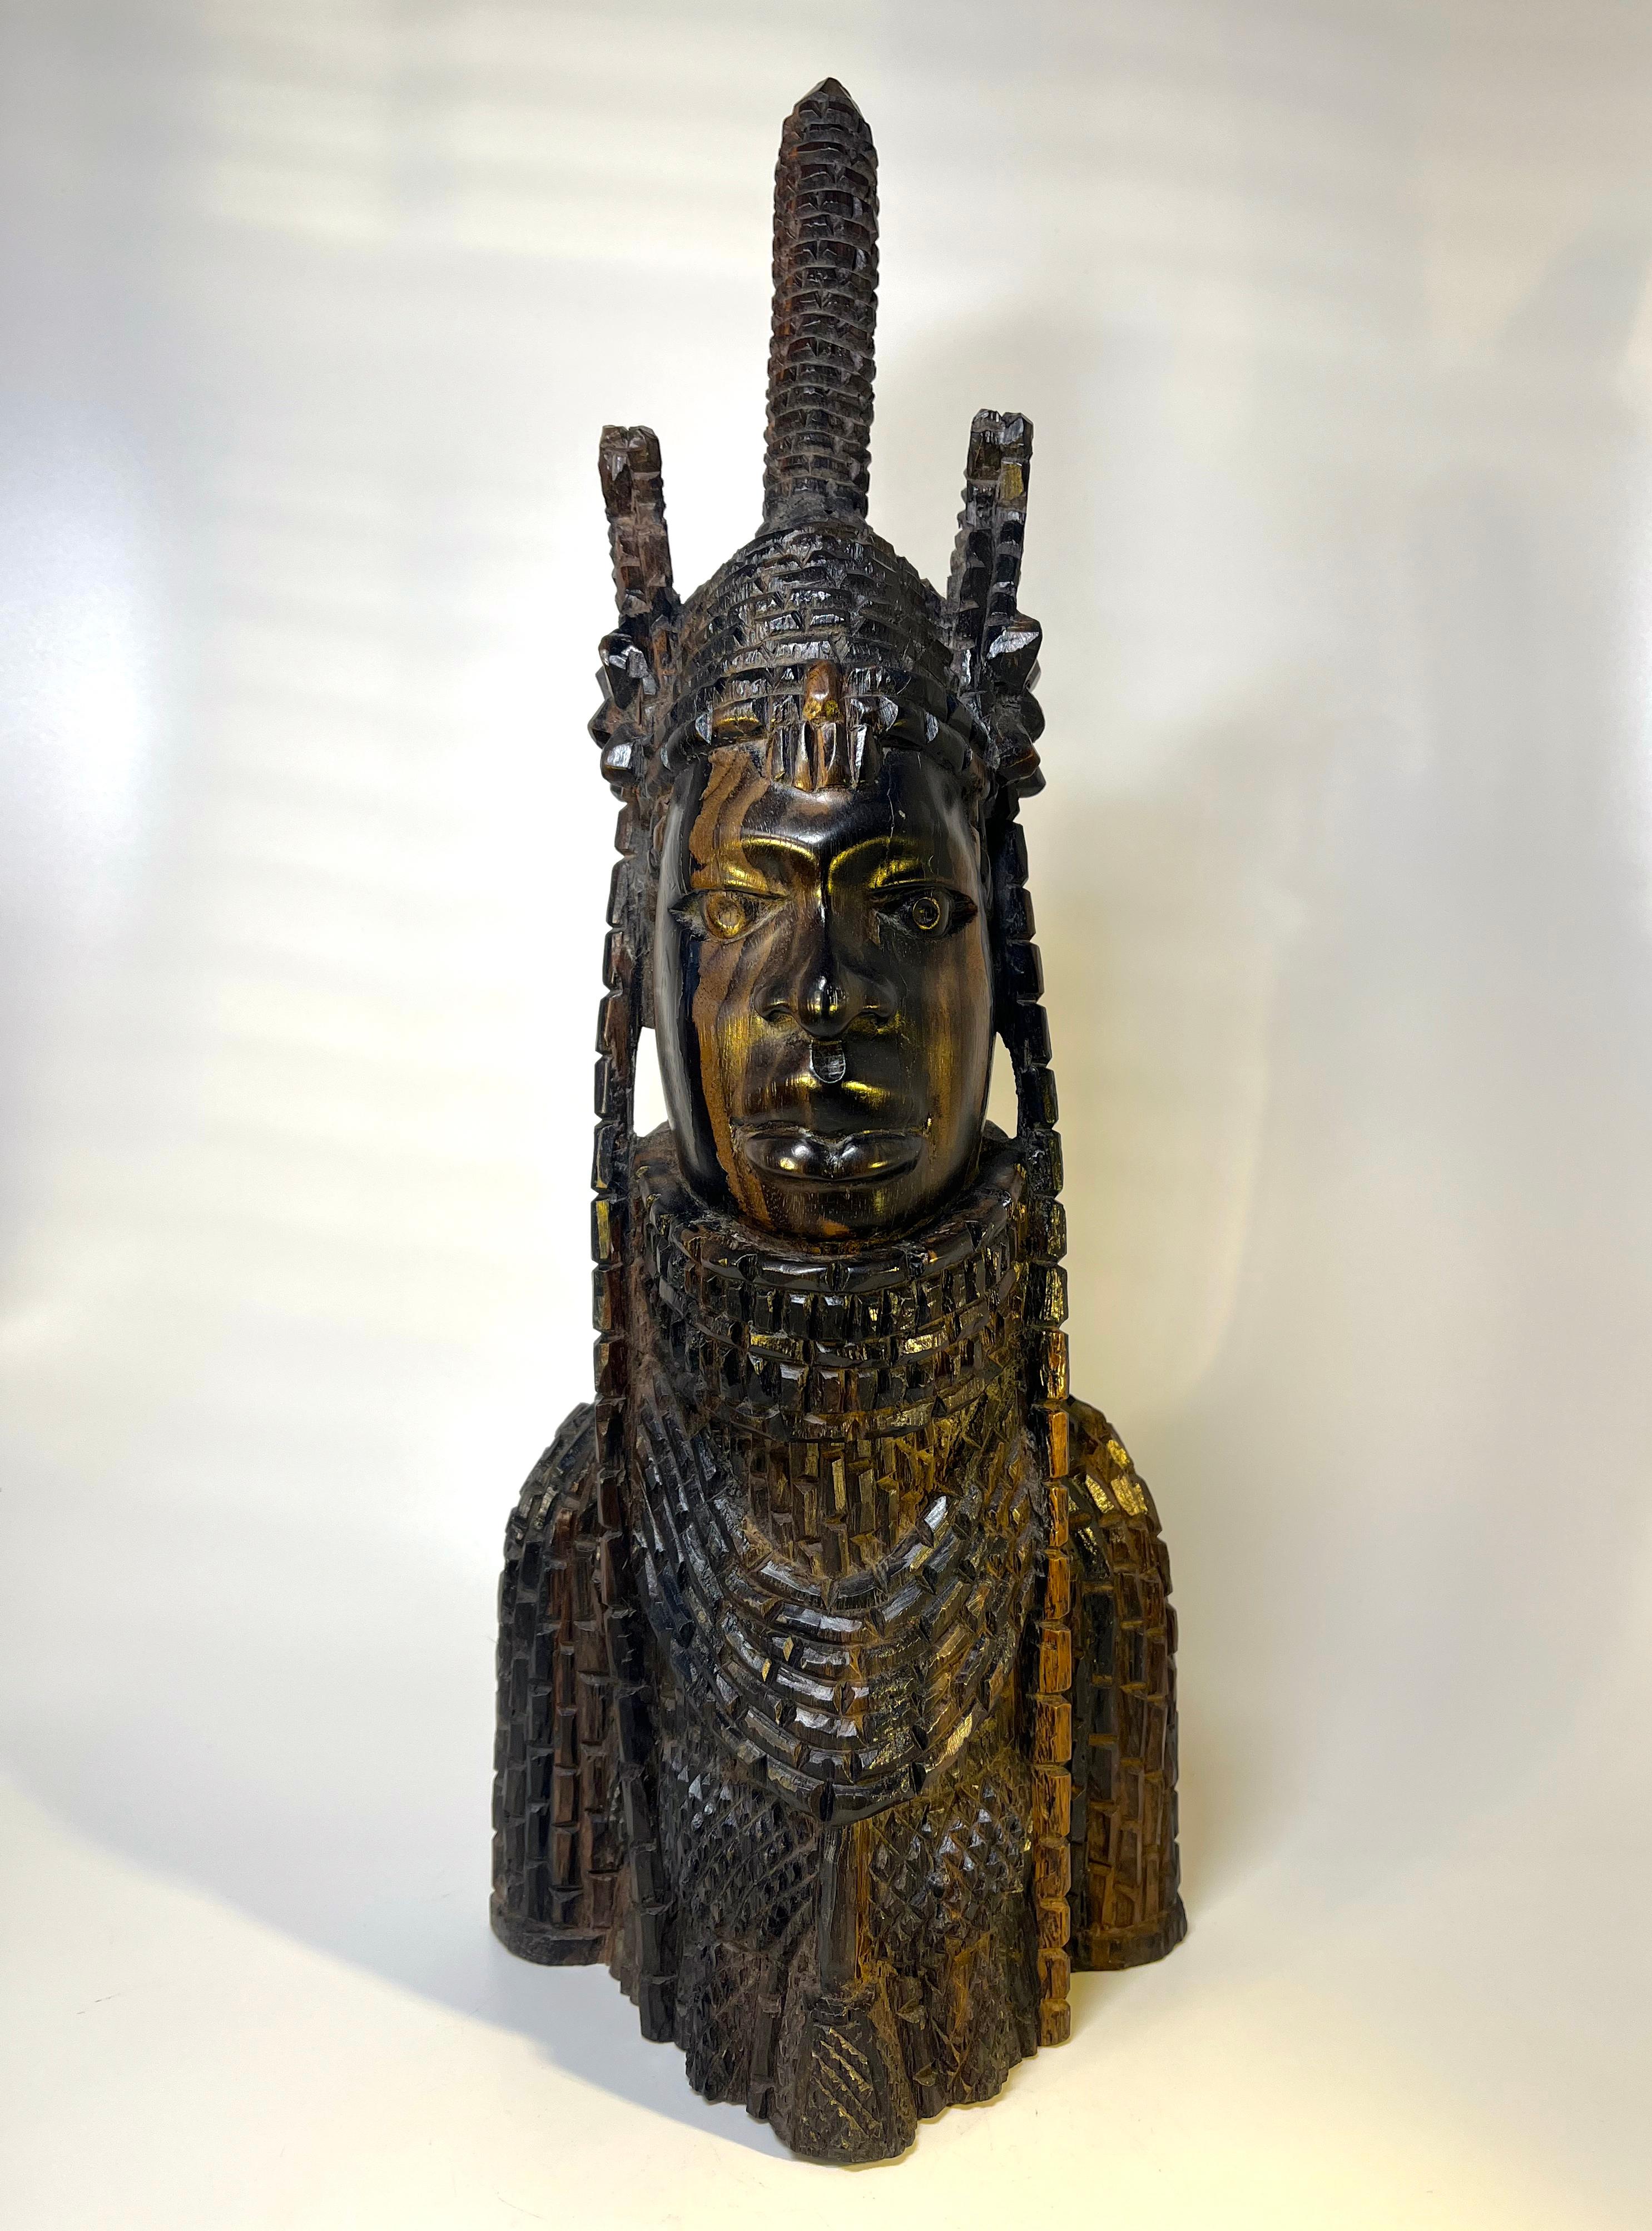 Truly a majestic Benin Oba. Beautifully and finely hand carved in Ebony hardwood from the 1930's
A piece of this quality and stature holds enormous presence
Height 17.75 inch, Width 6.75 inch, Depth 4.75 inch
Circa 1930's
A heavy and striking